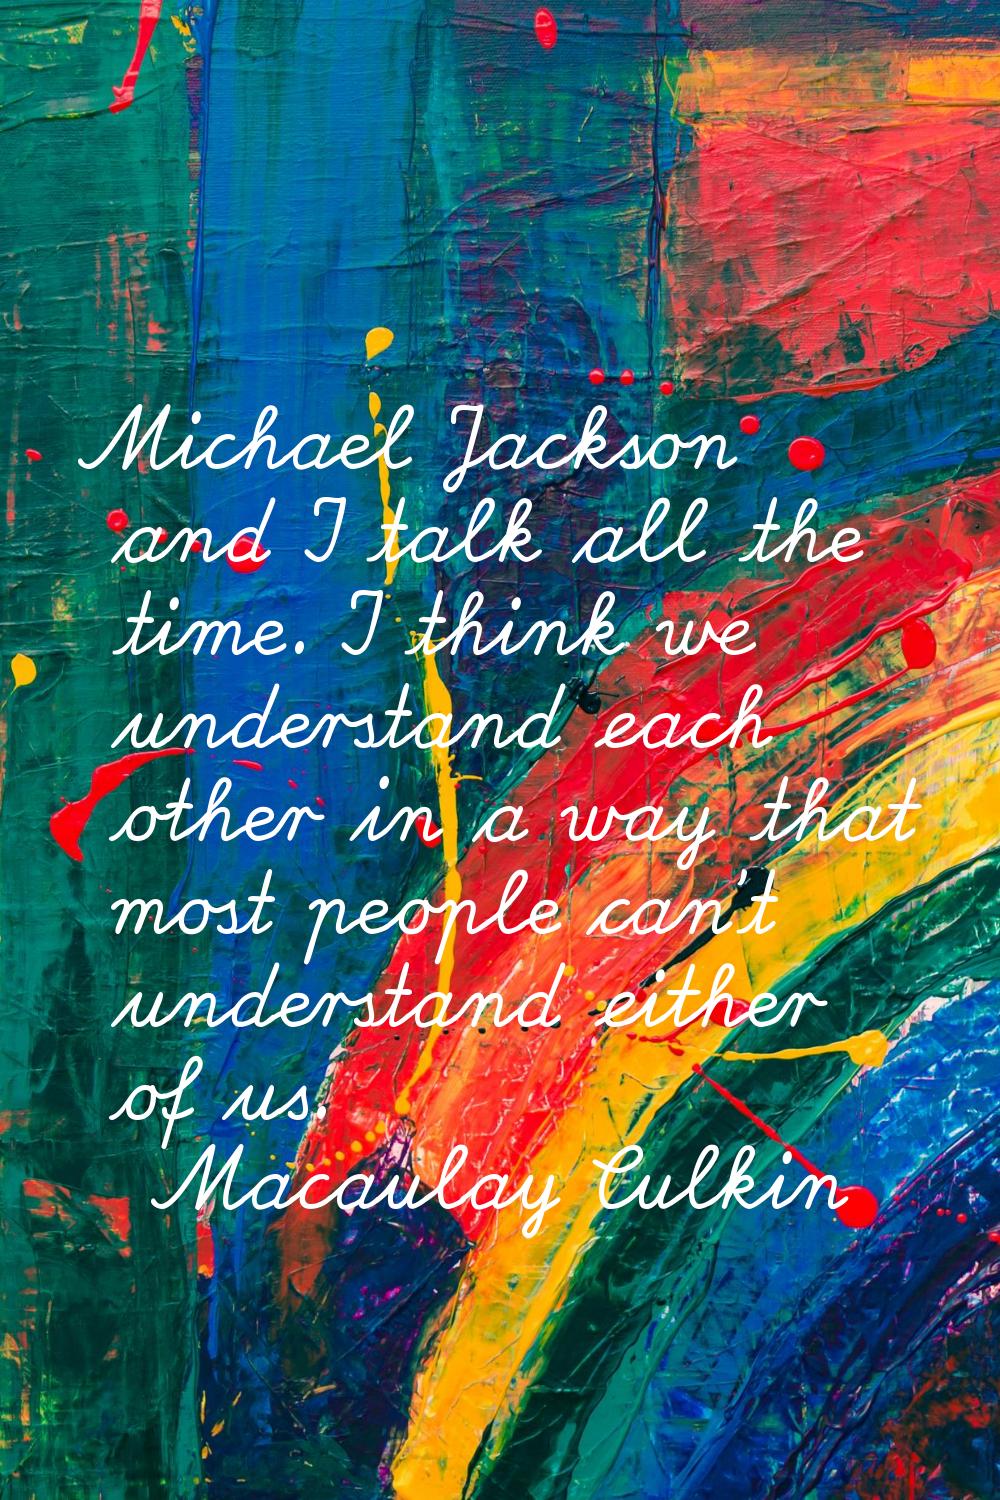 Michael Jackson and I talk all the time. I think we understand each other in a way that most people